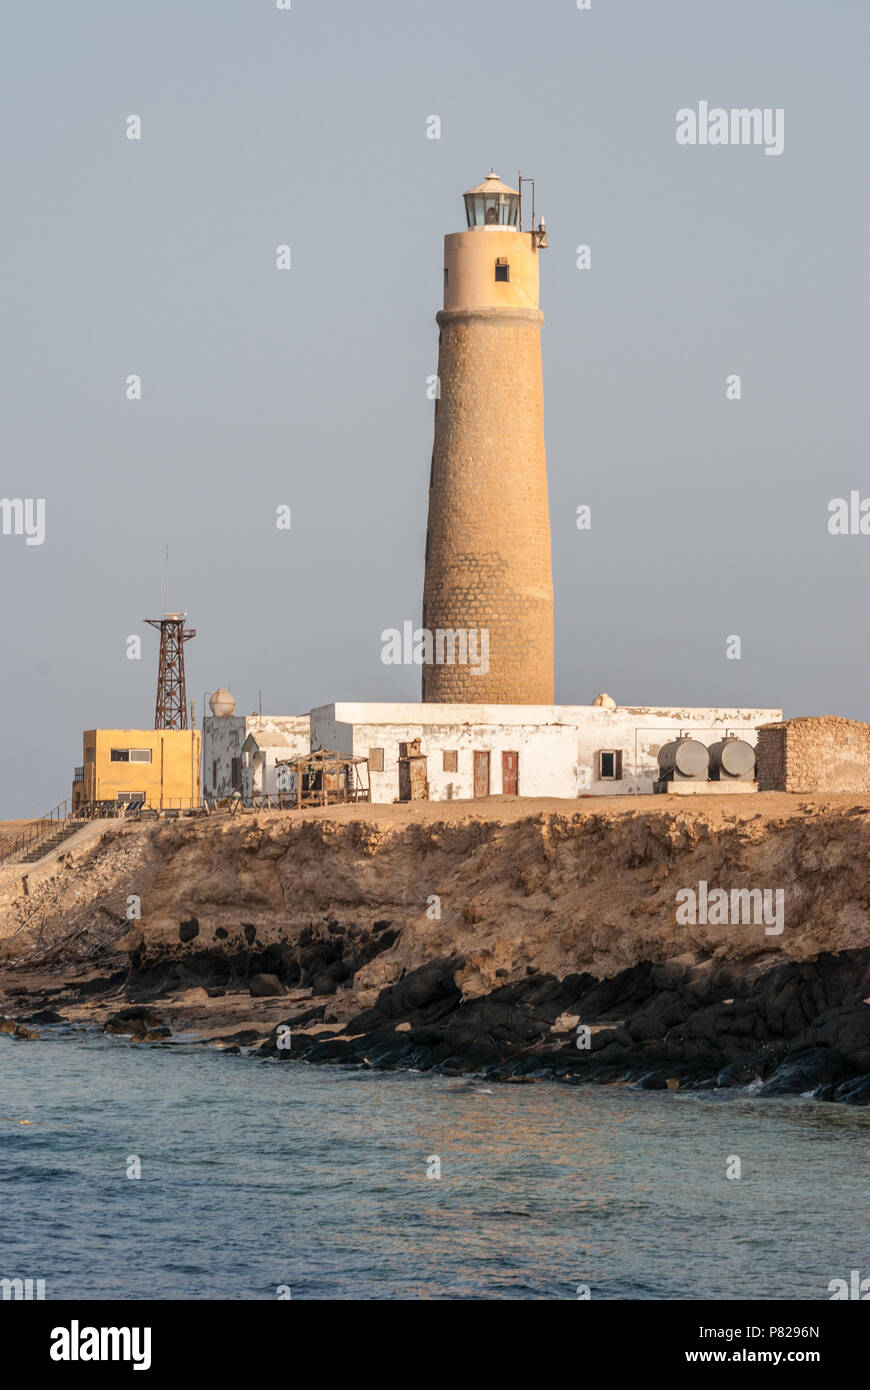 Phare, big brother island, Red Sea, Egypt Banque D'Images